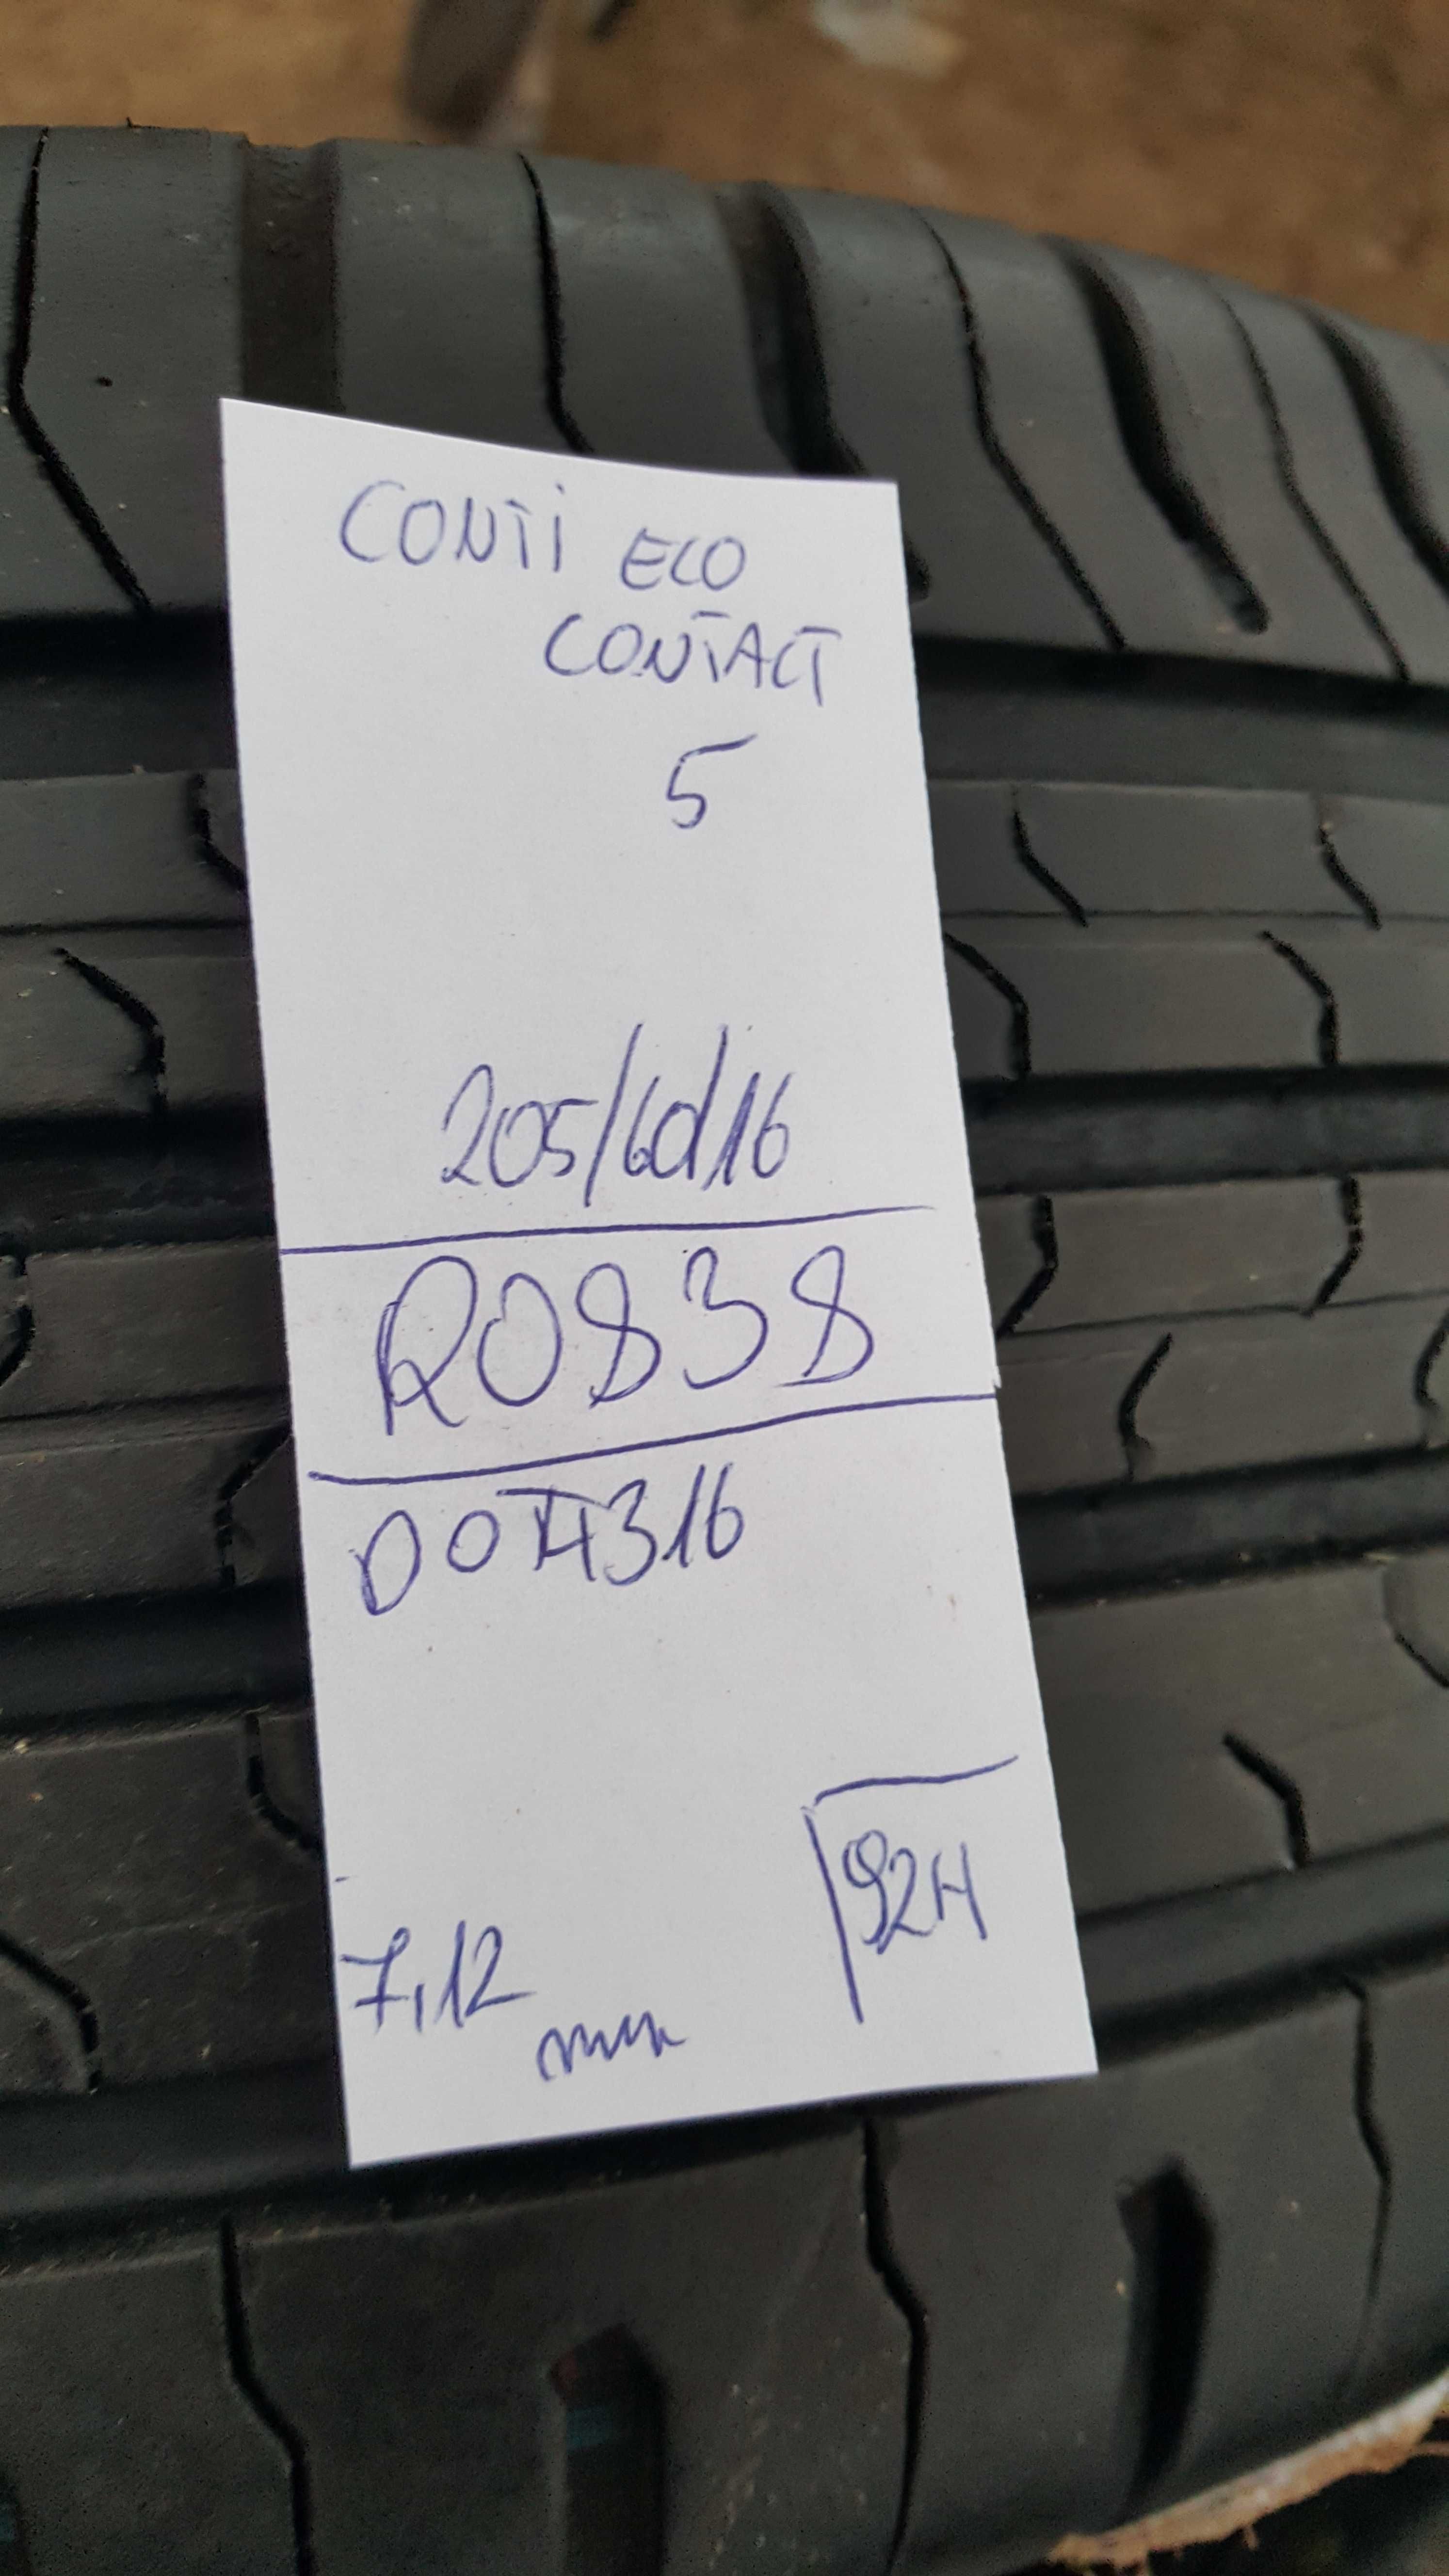 Continental 205/60 r16 ContiEcoContact 5 /// 7,1mm!!!